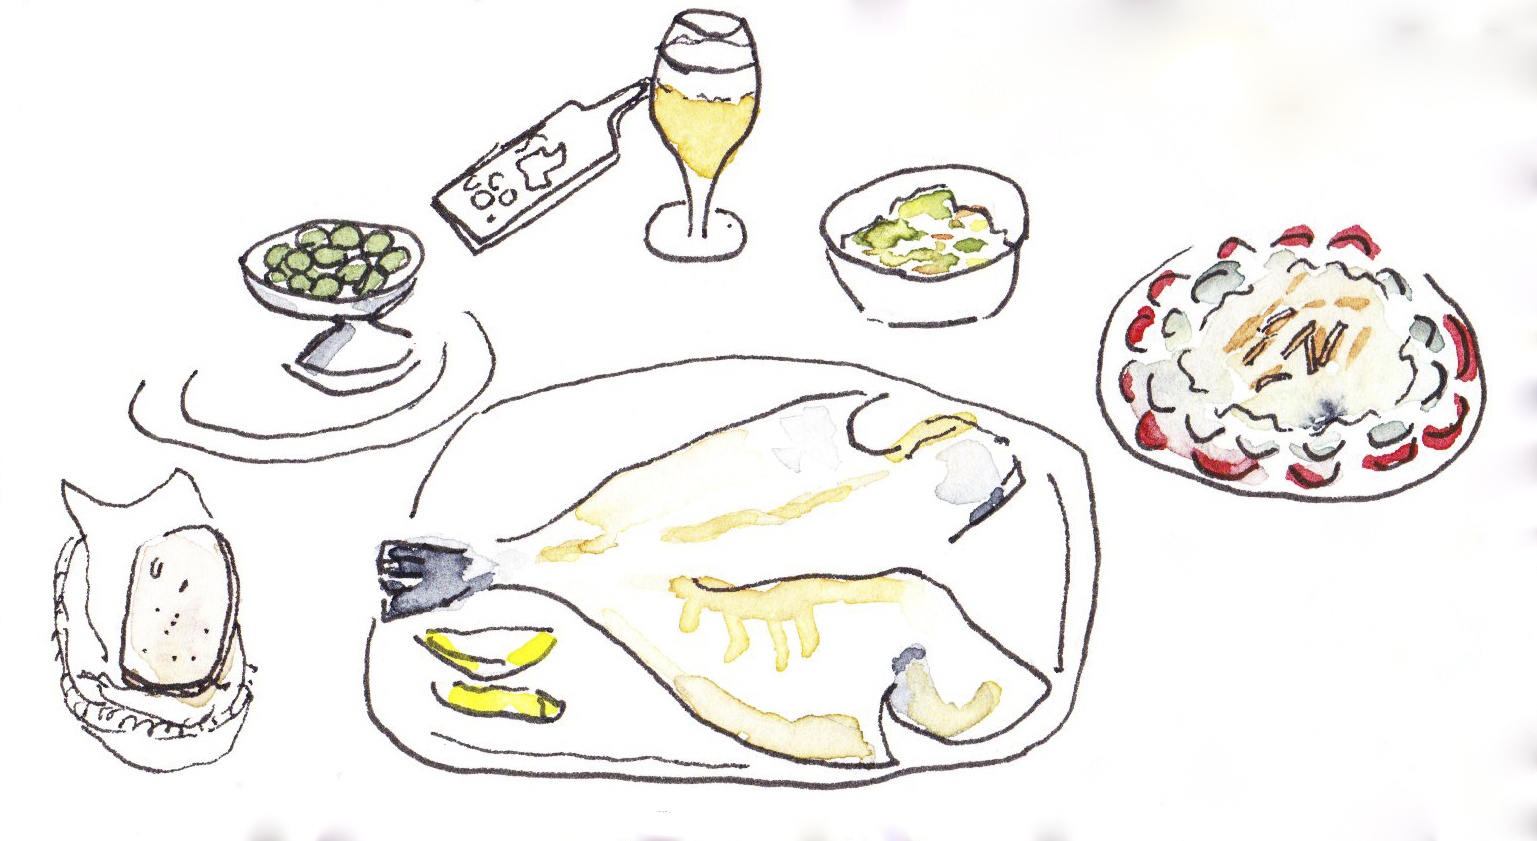 Watercolor painting of the meal at Tasquinha do Chefe Laçarote